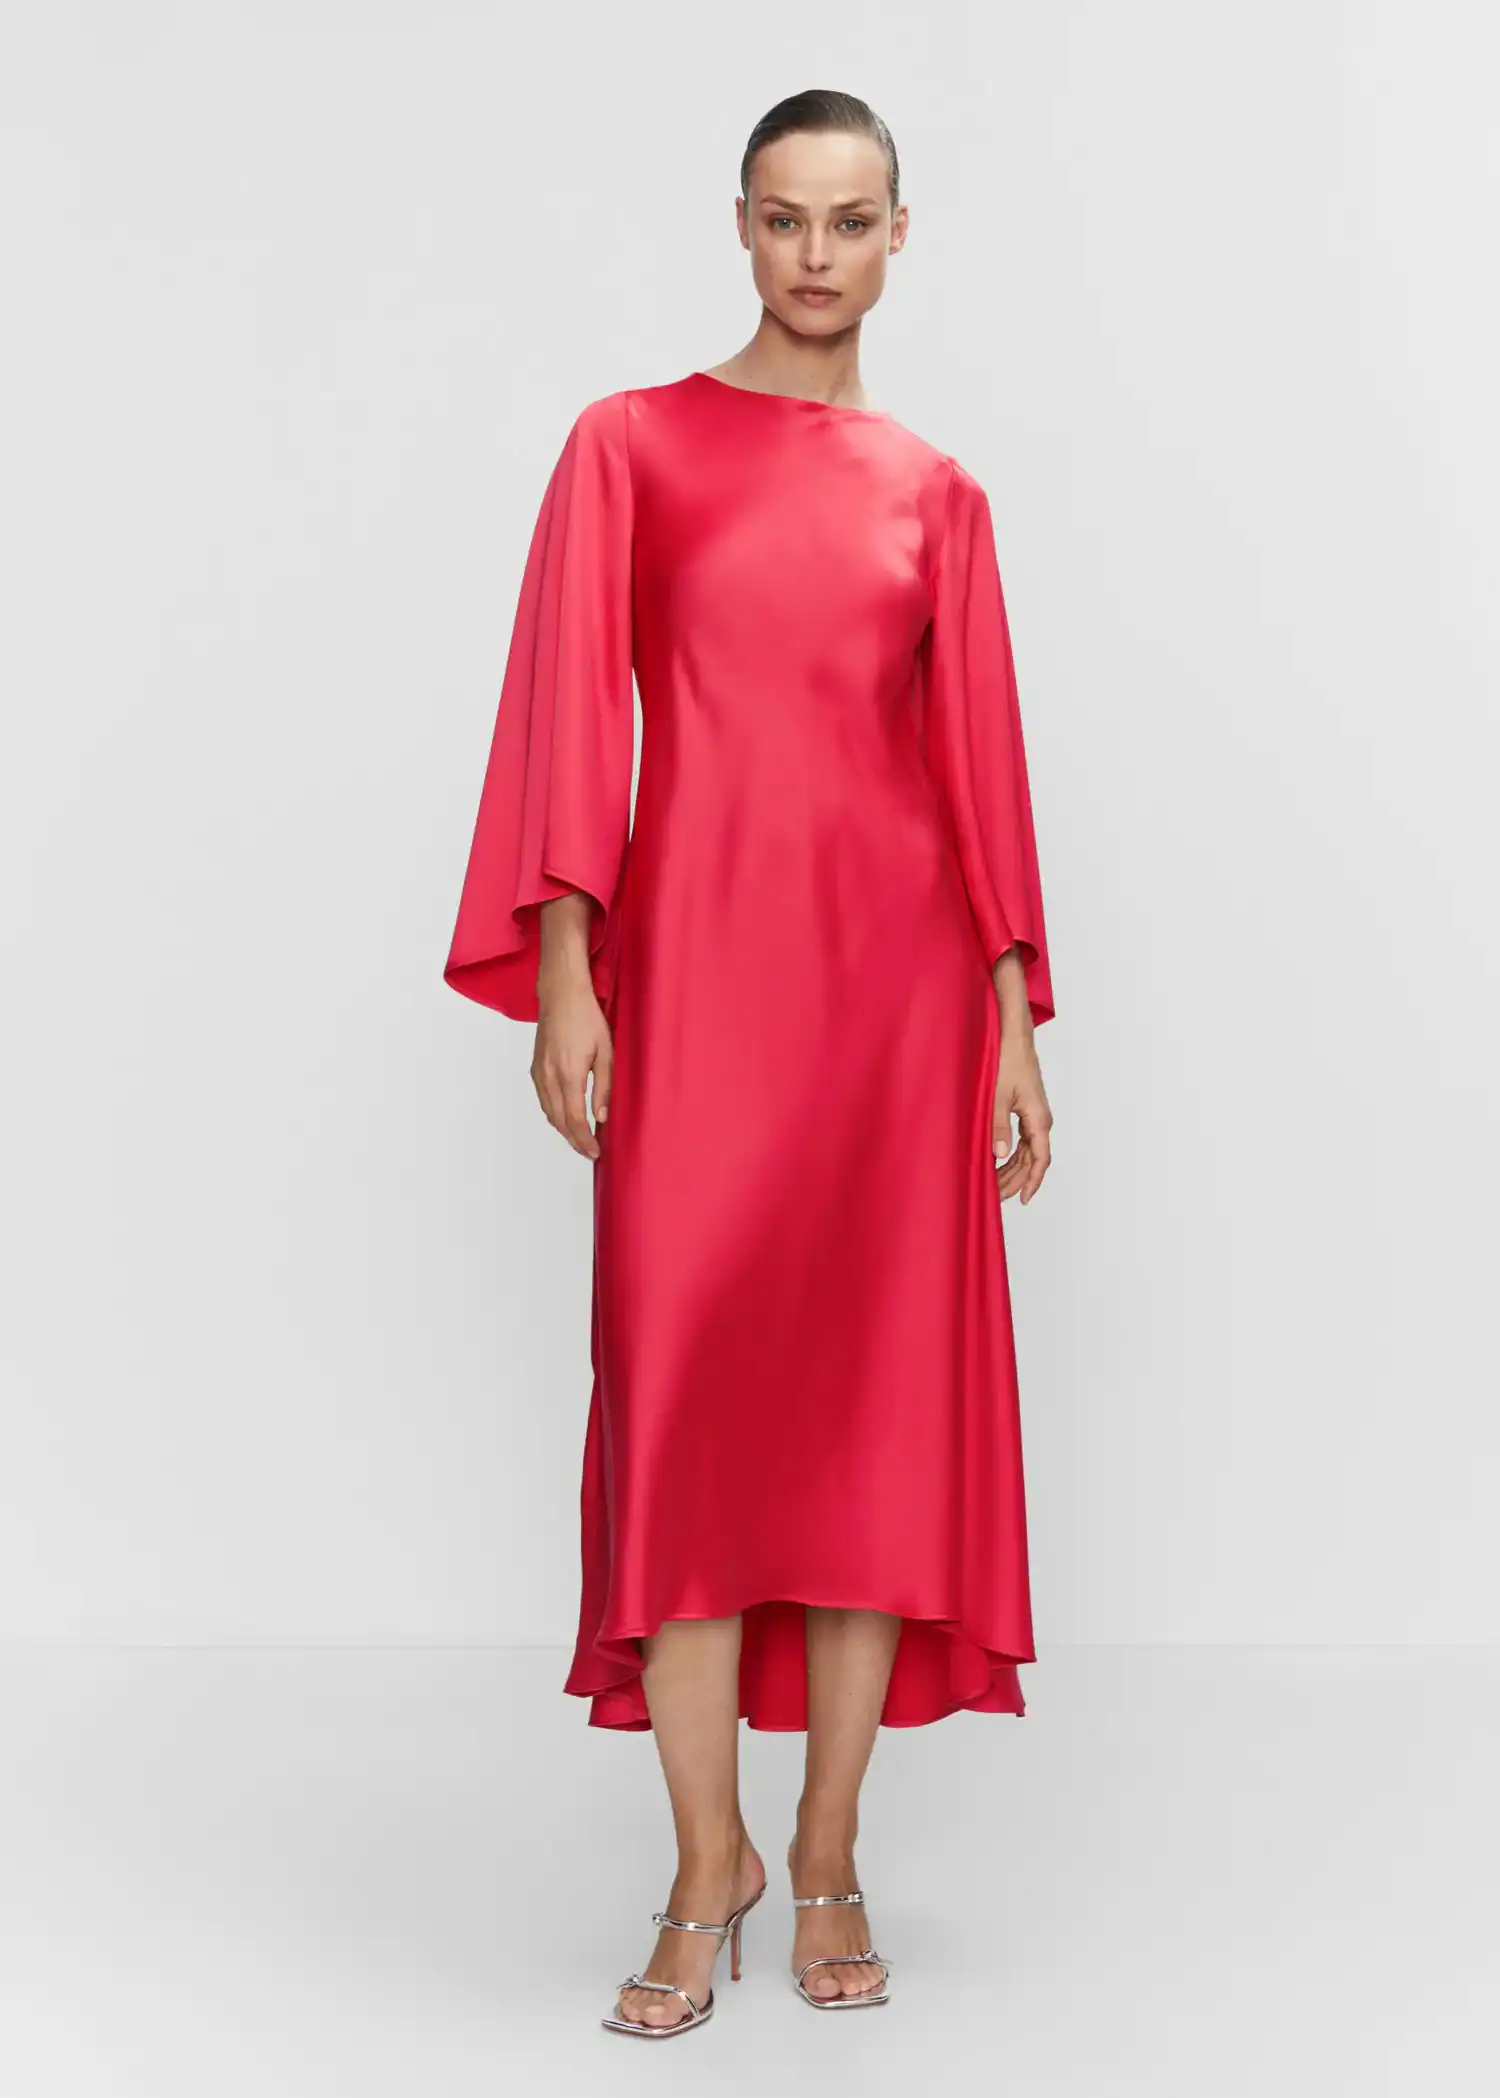 Mango Flared-sleeve satin dress. a woman wearing a red dress standing in front of a white wall. 